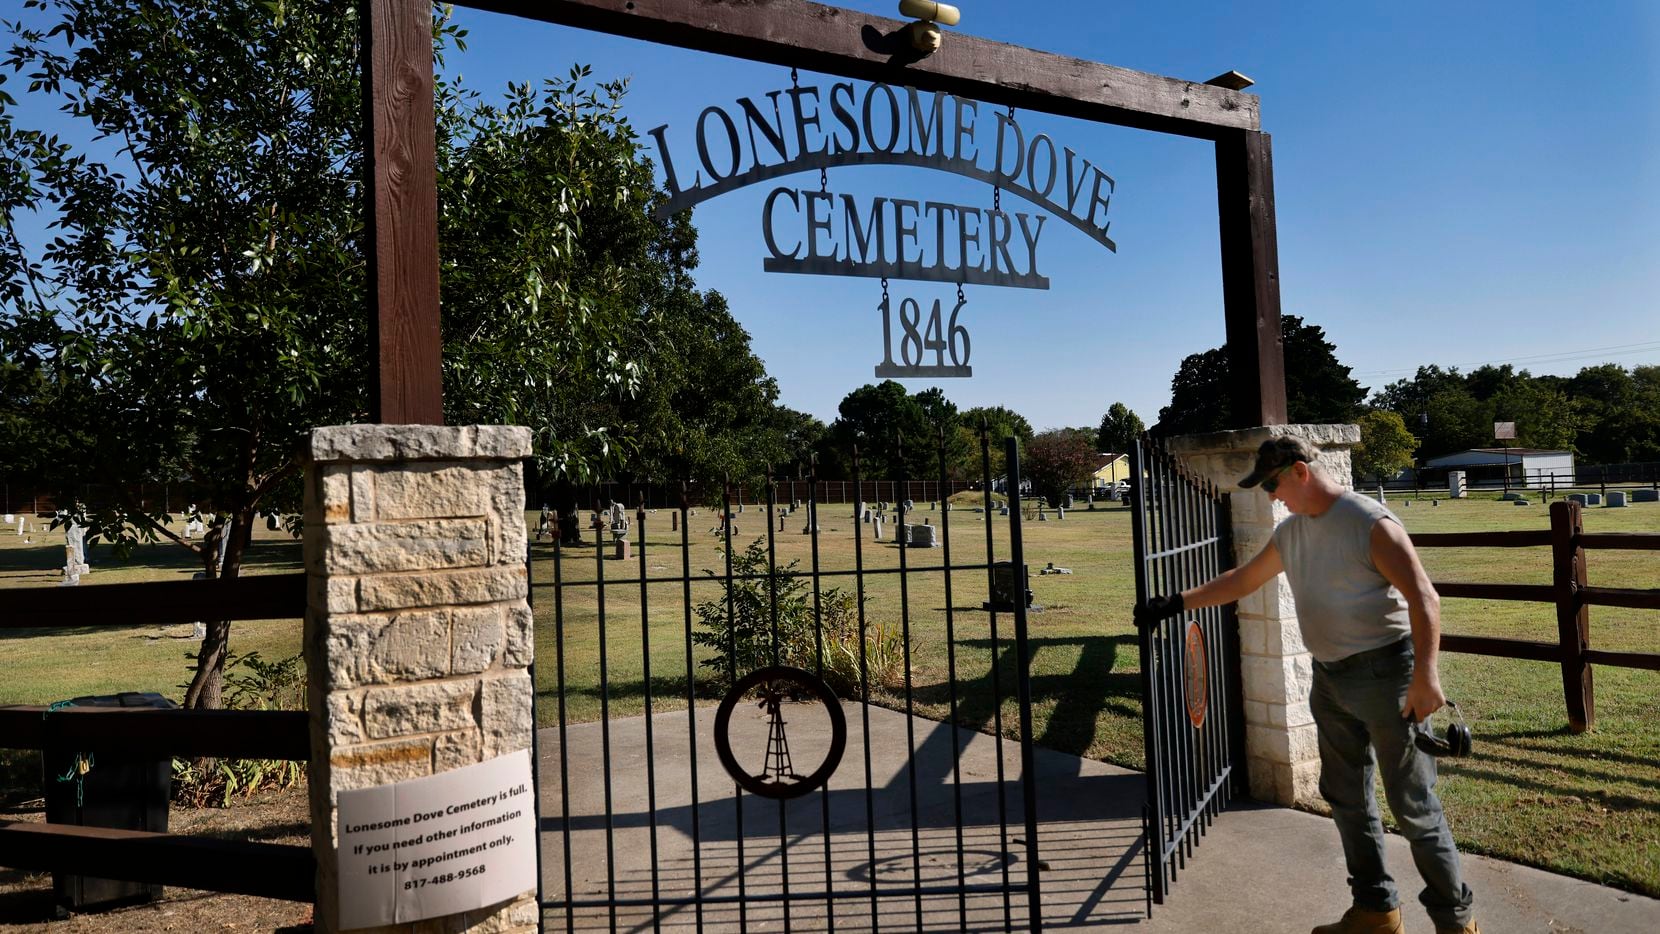 The pastor of Lonesome Dove Baptist Church in Southlake has taken over operations of the...